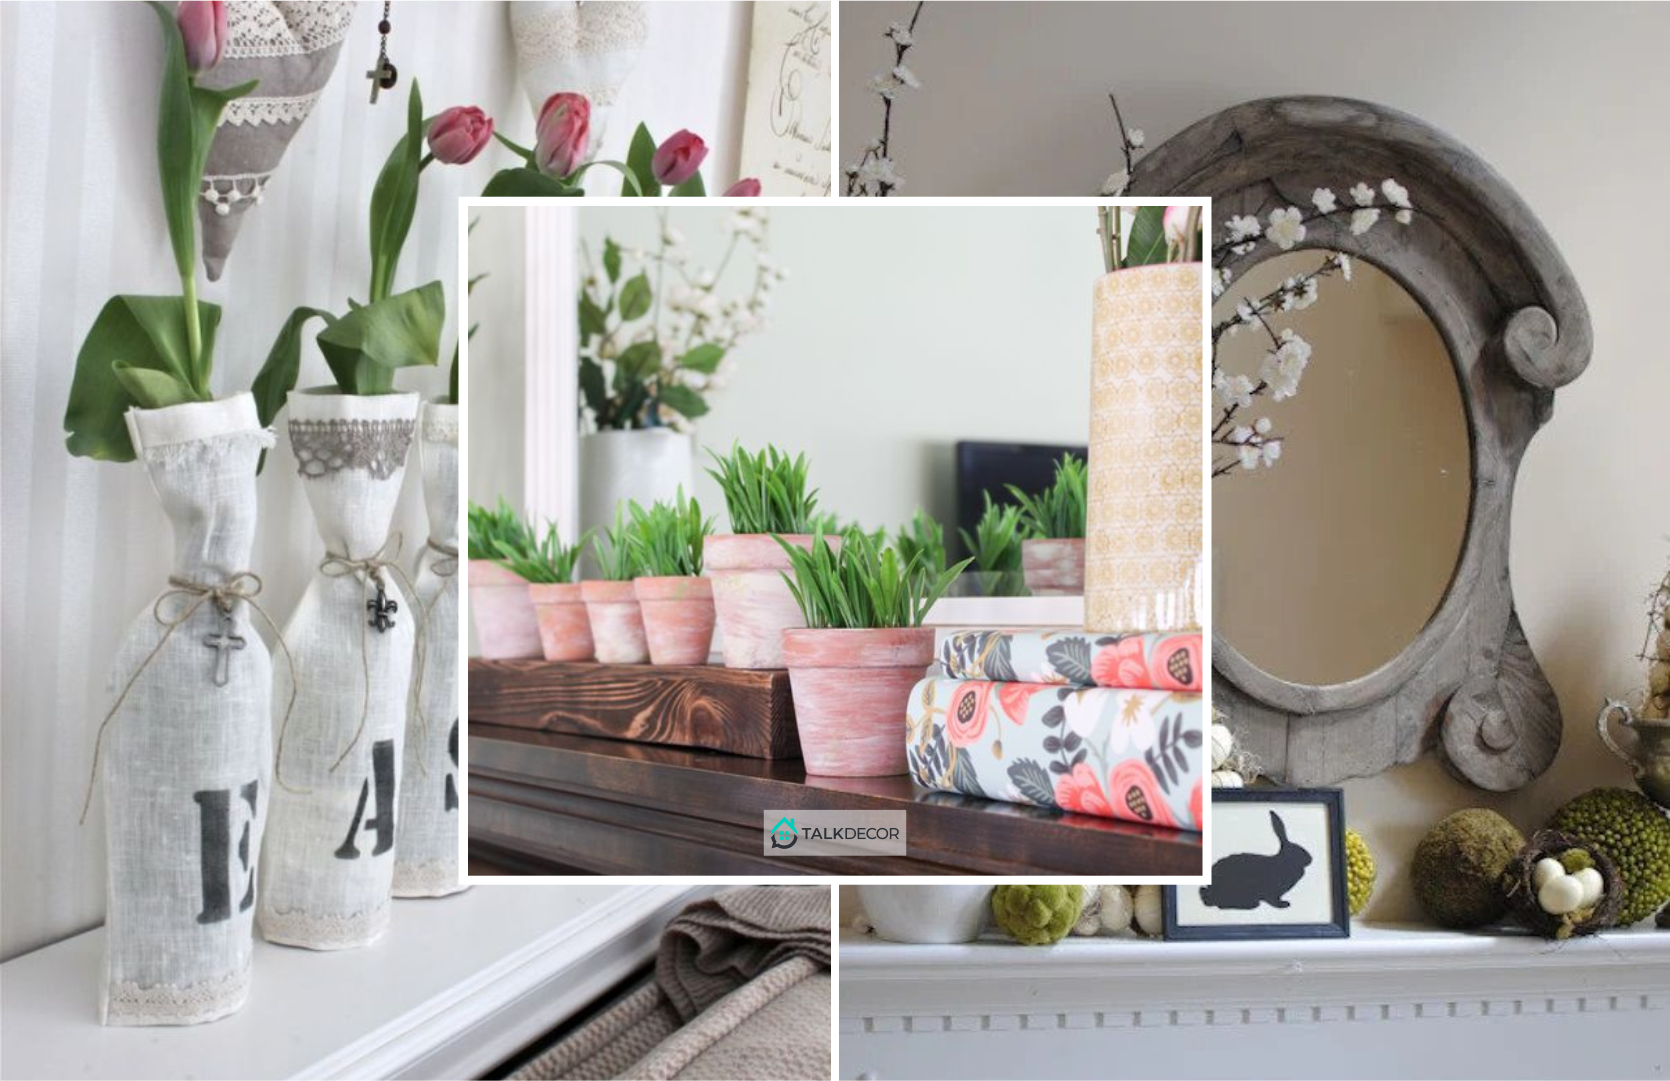 50 Ways to Decorate Your Spring Mantel